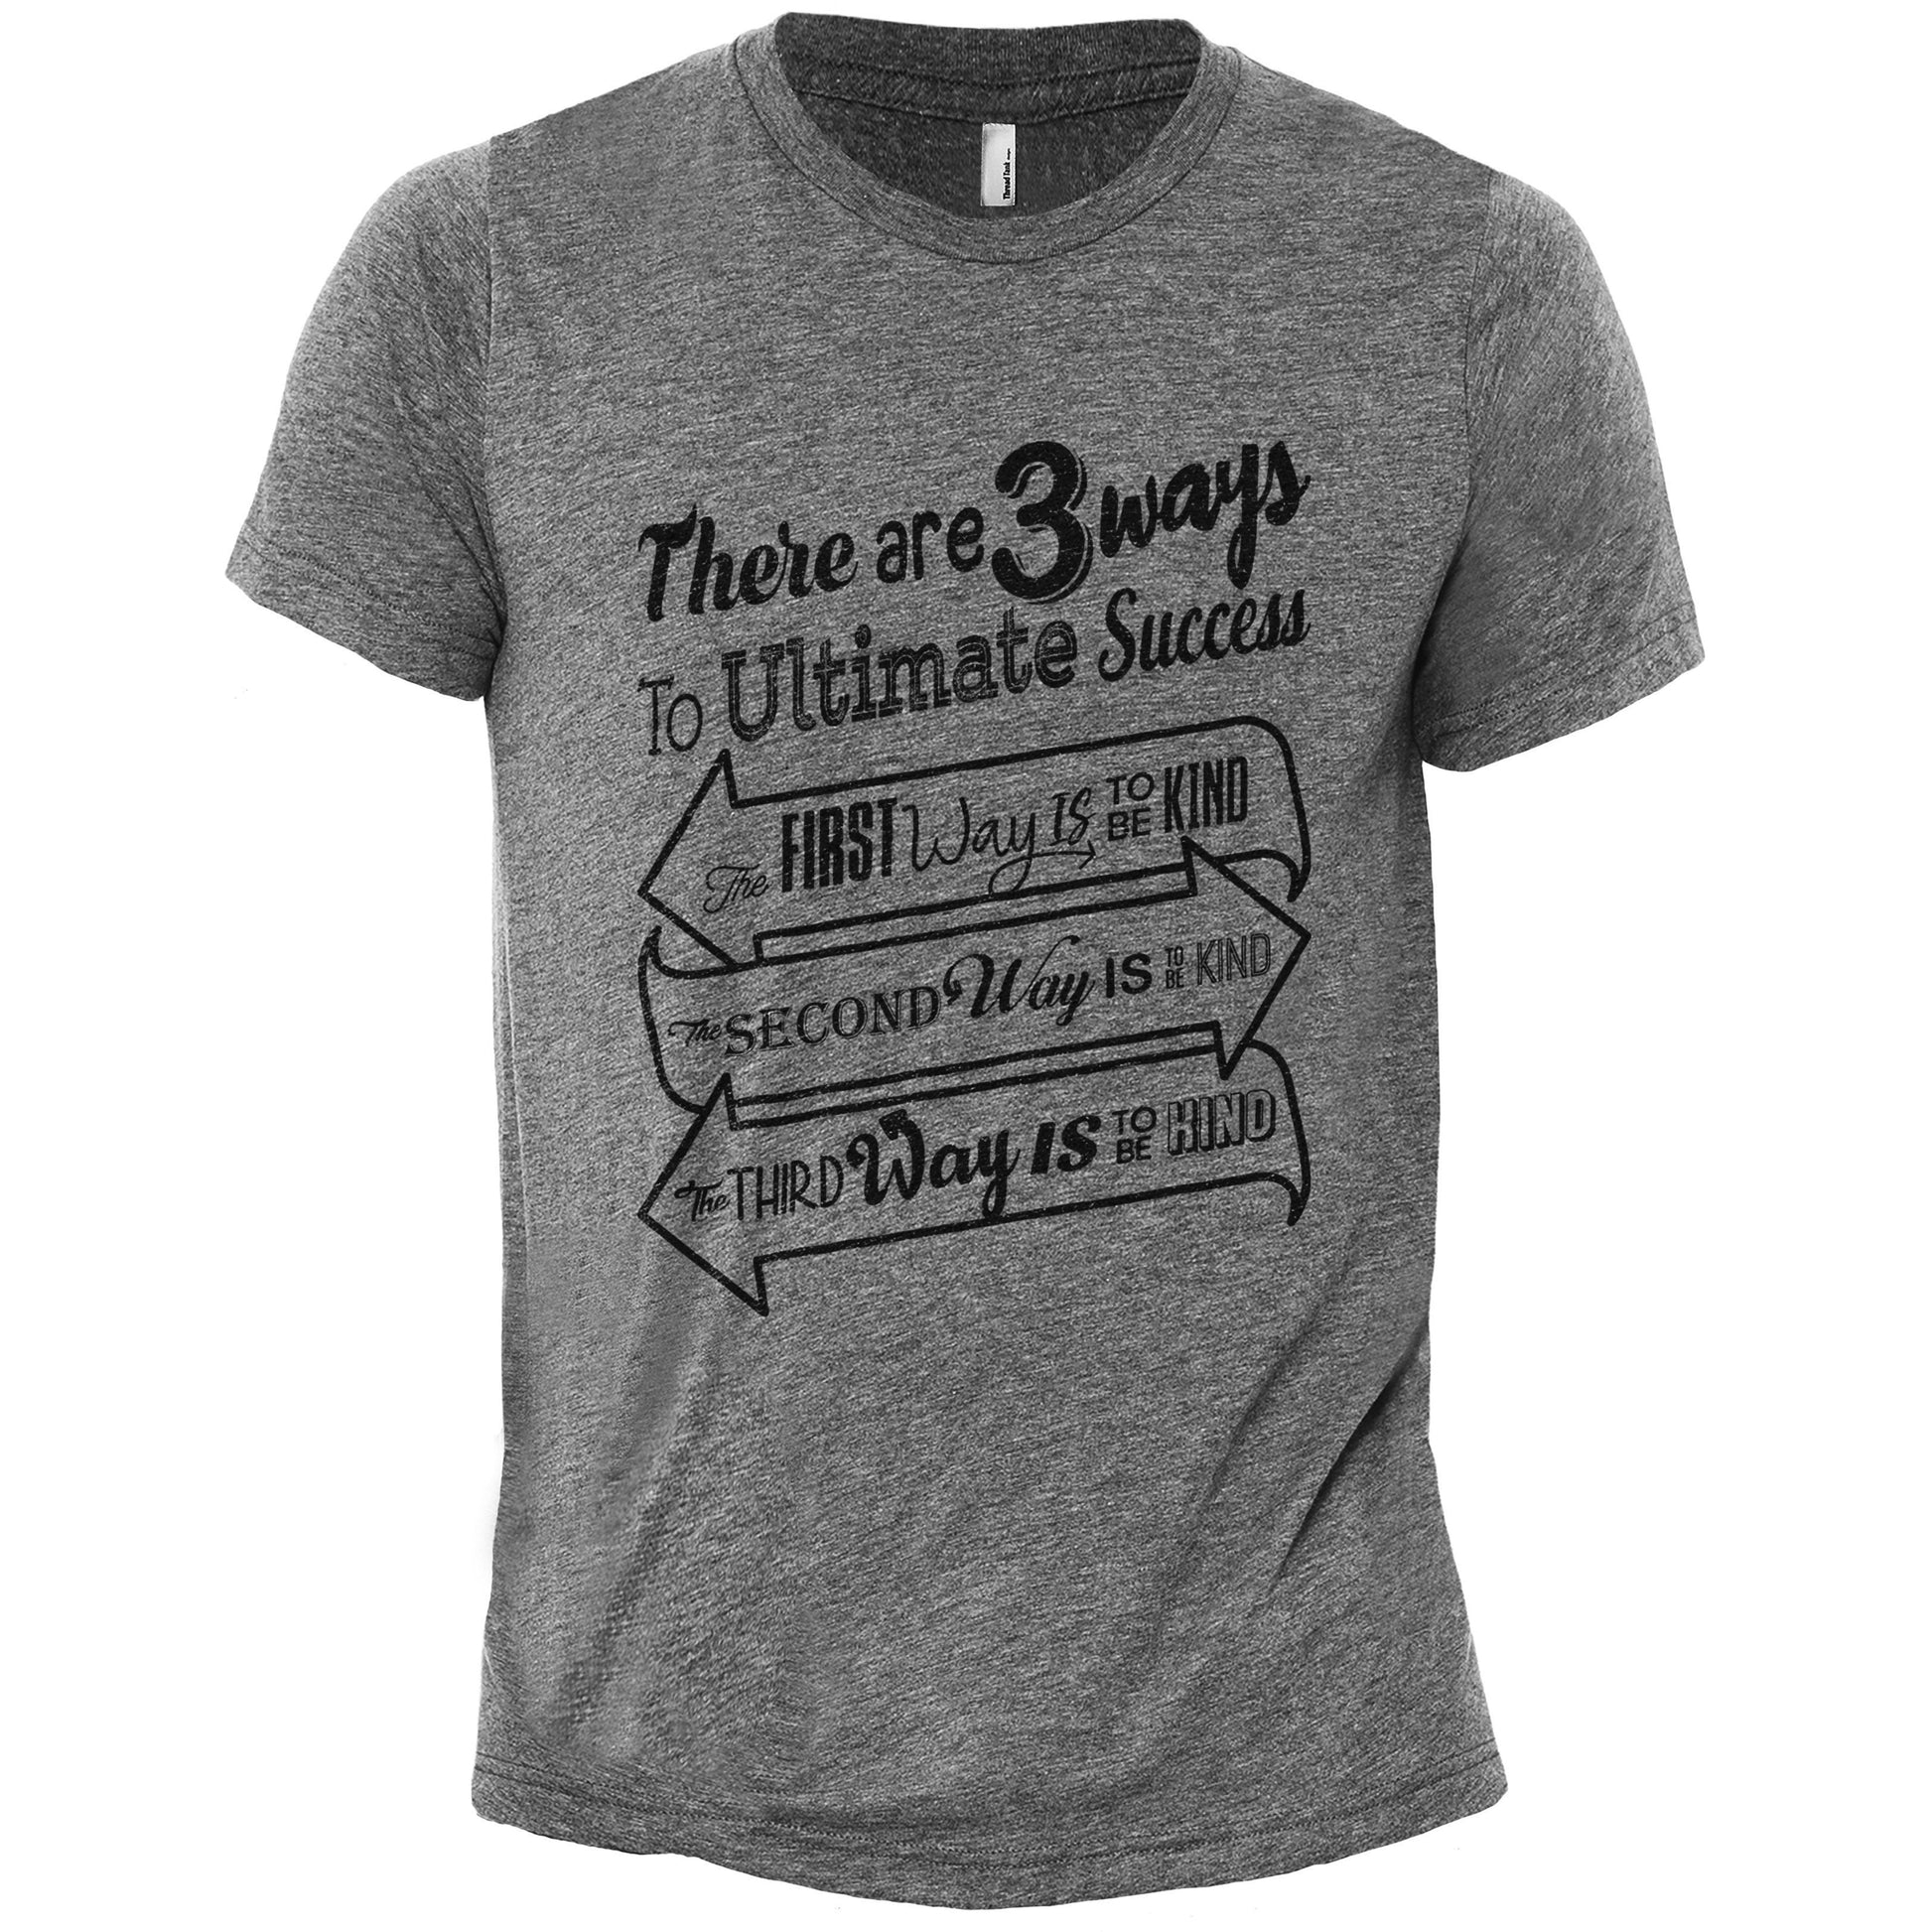 There Are Three Ways To Ultimate Success: The First Way Is To Be Kind. The Second Way Is To Be Kind. The Third Way Is To Be Kind - threadtank | stories you can wear